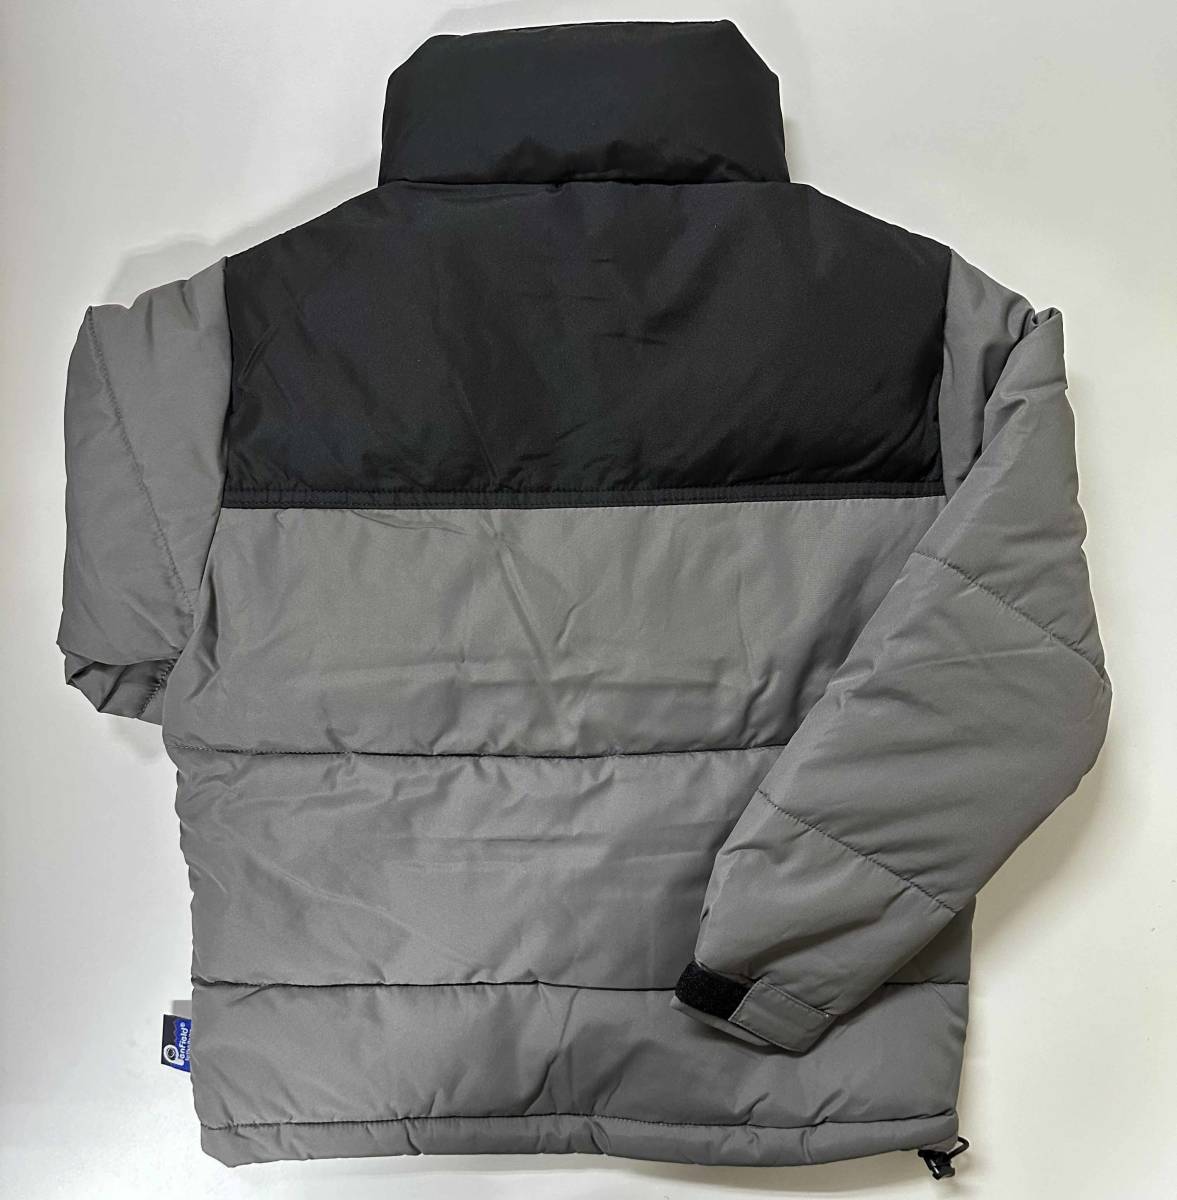  new goods 130 * Penfield Penfield cotton inside jacket gray black cost ko Kids boys girls puff water-repellent outer 